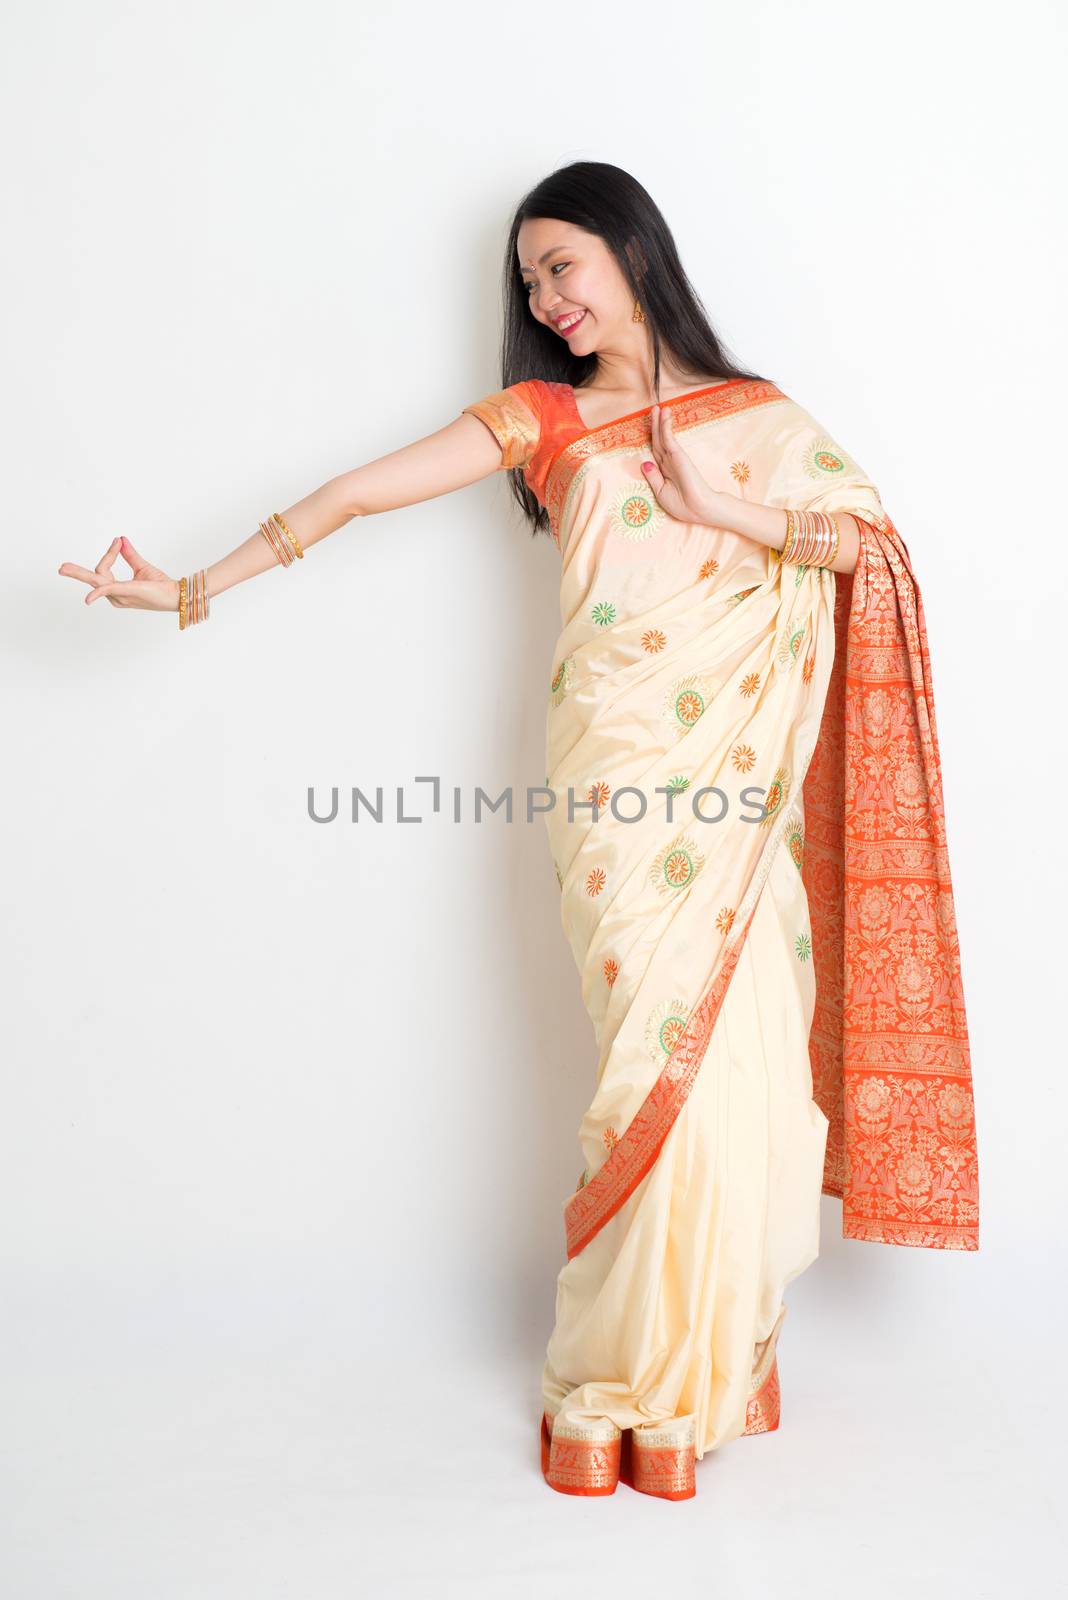 Portrait of young mixed race Indian Chinese woman in traditional sari dress dancing, full length on plain background.